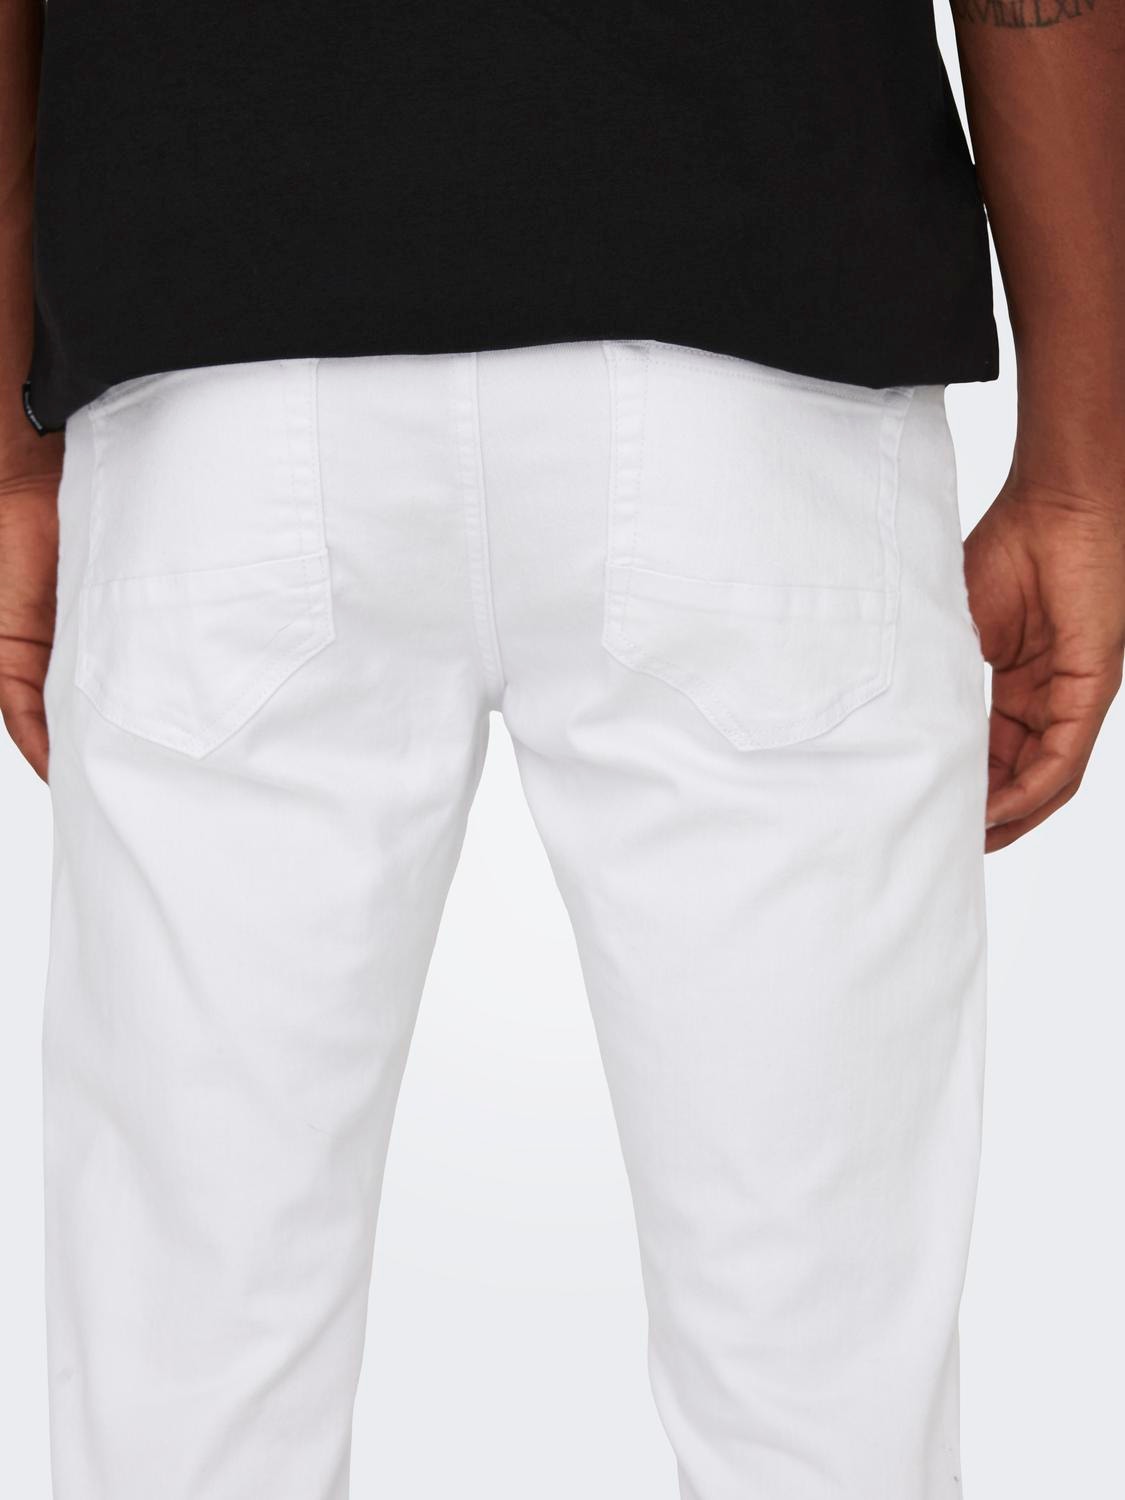 ONLY & SONS Jeans Slim Fit Taille basse -White Denim - 22026529